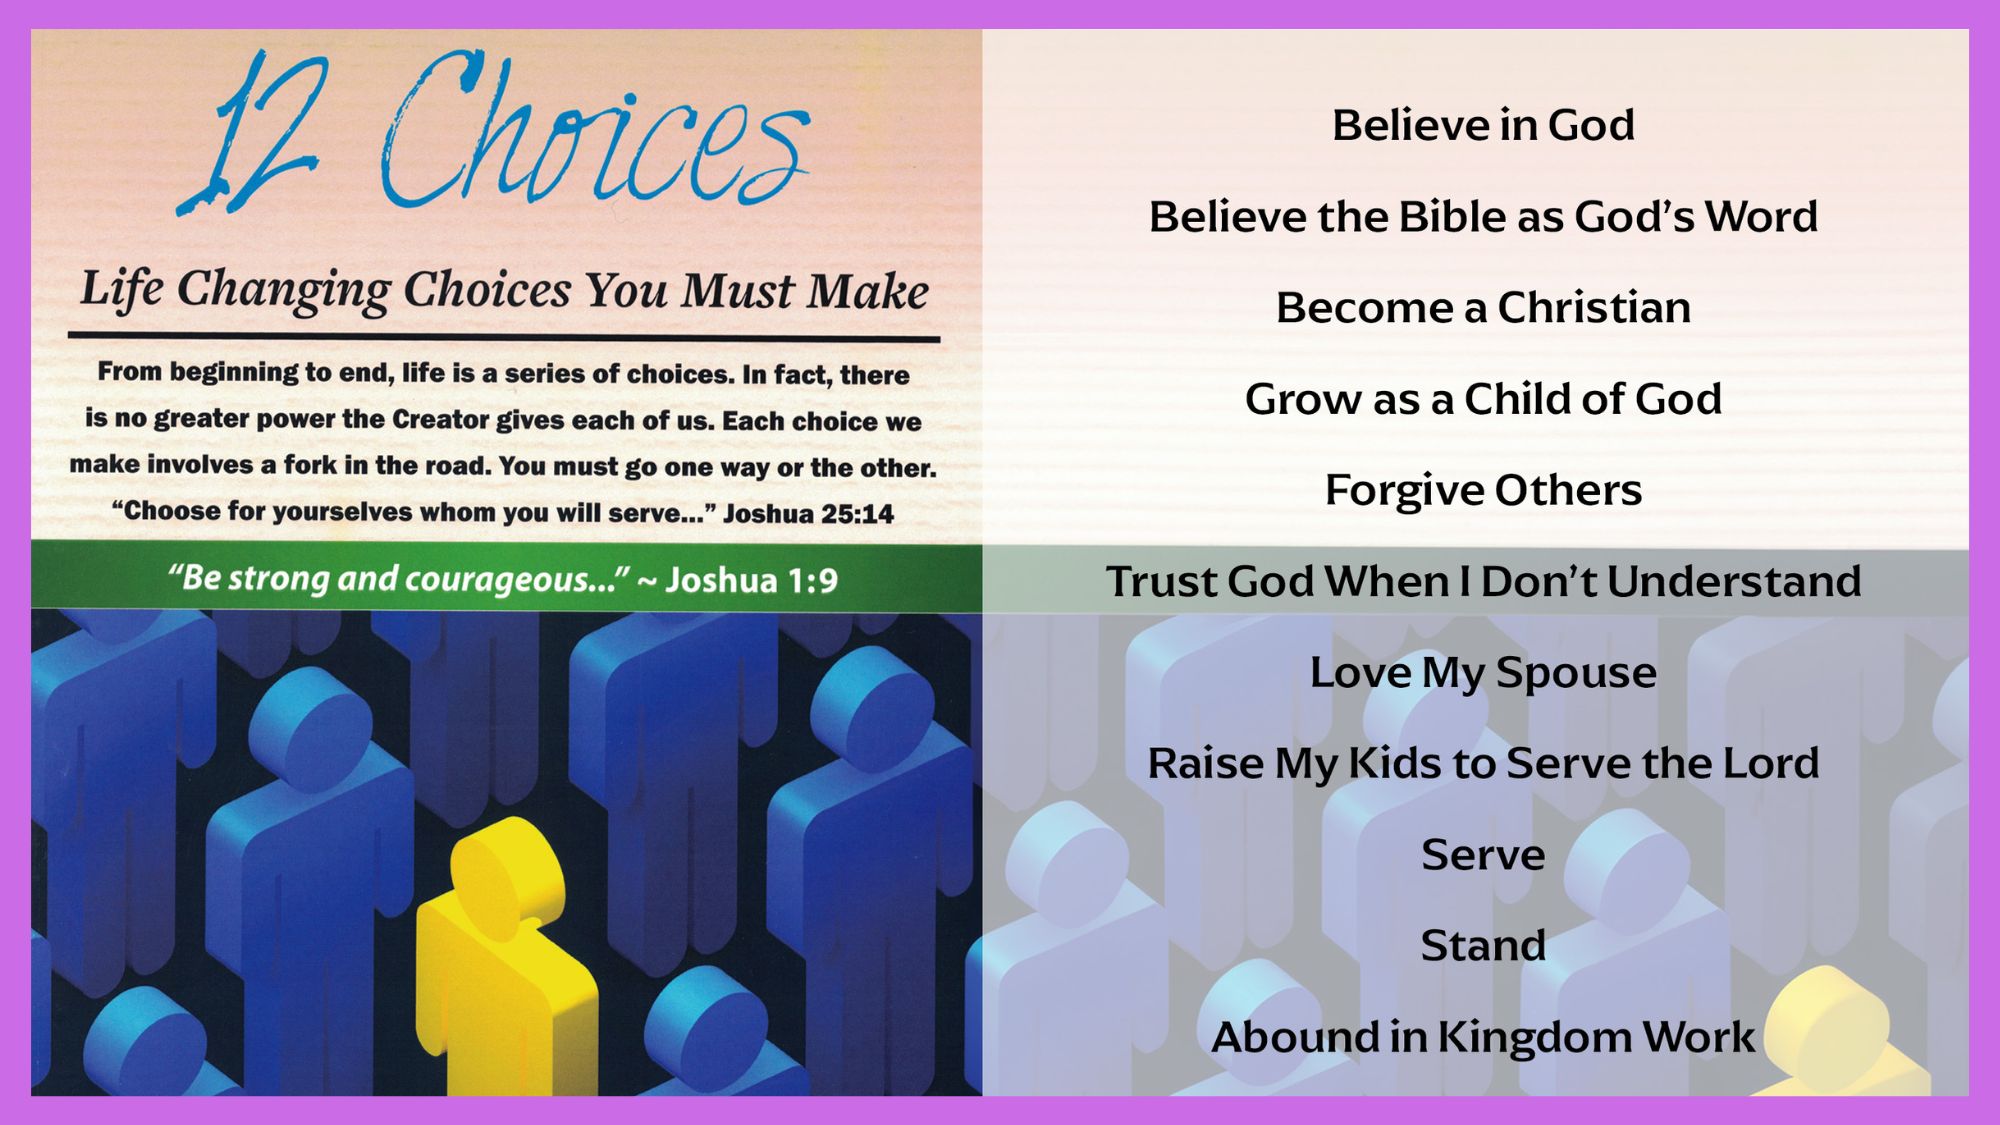 12 Choices - Life Changing Choices You Must Make: Choice # 8 Raise My Kids to Serve the Lord Category